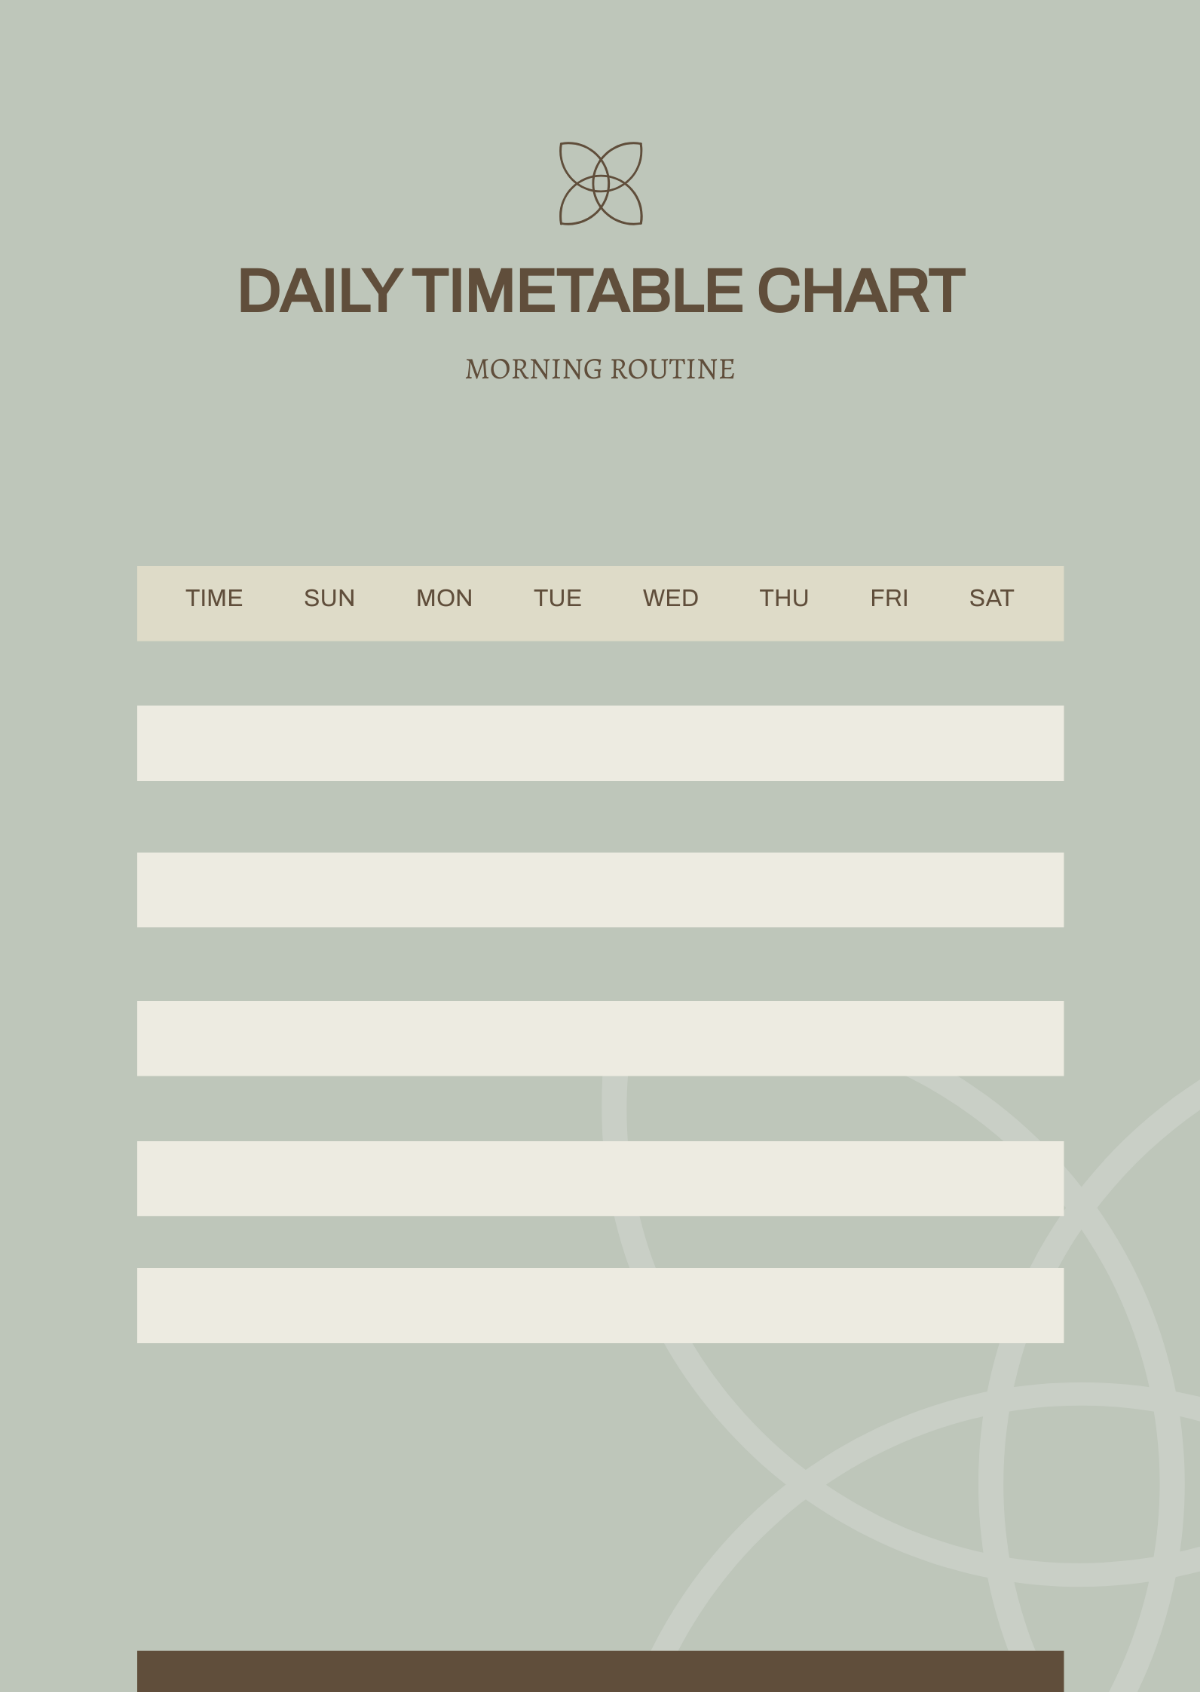 Daily Time Table Chart Template